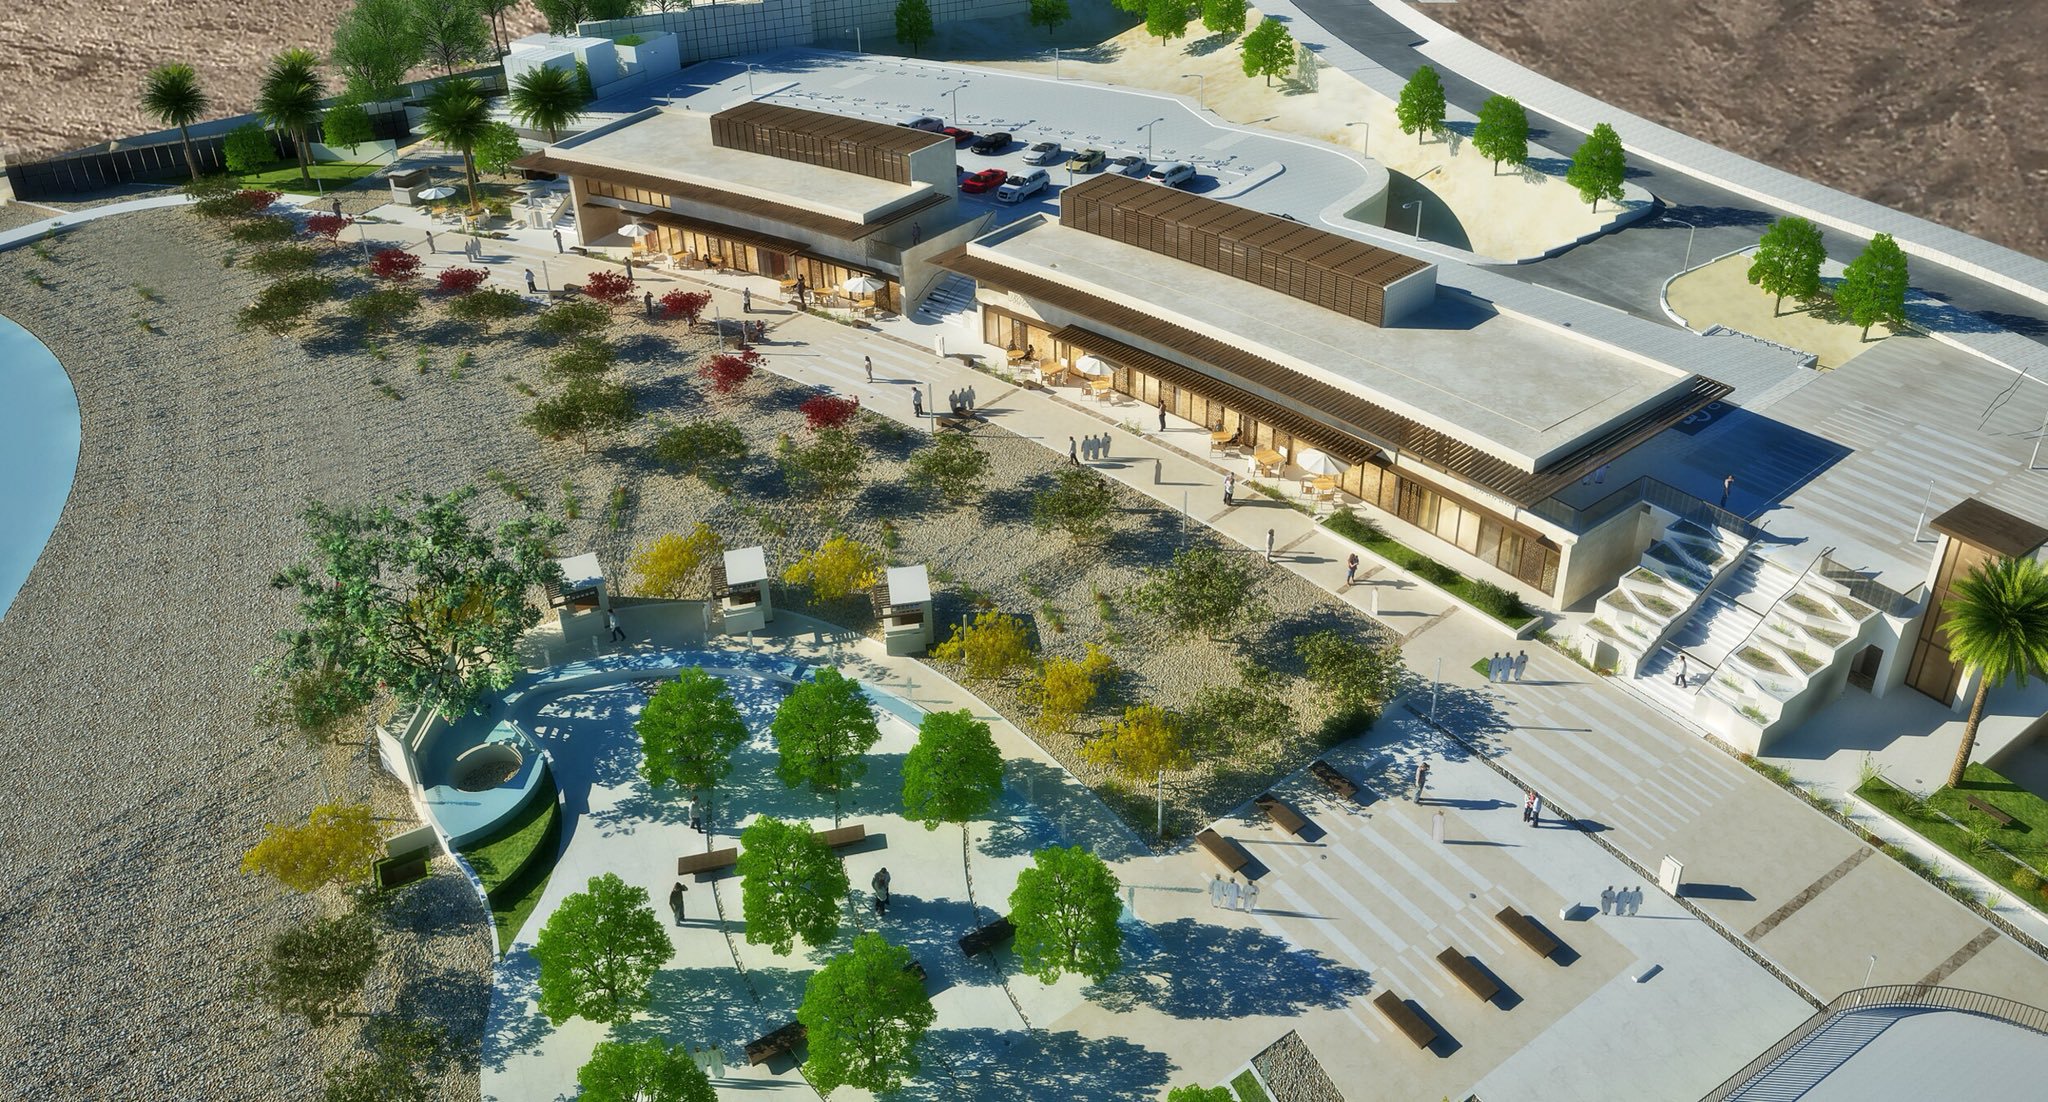 Muscat Bay places foundation stone for its new village square